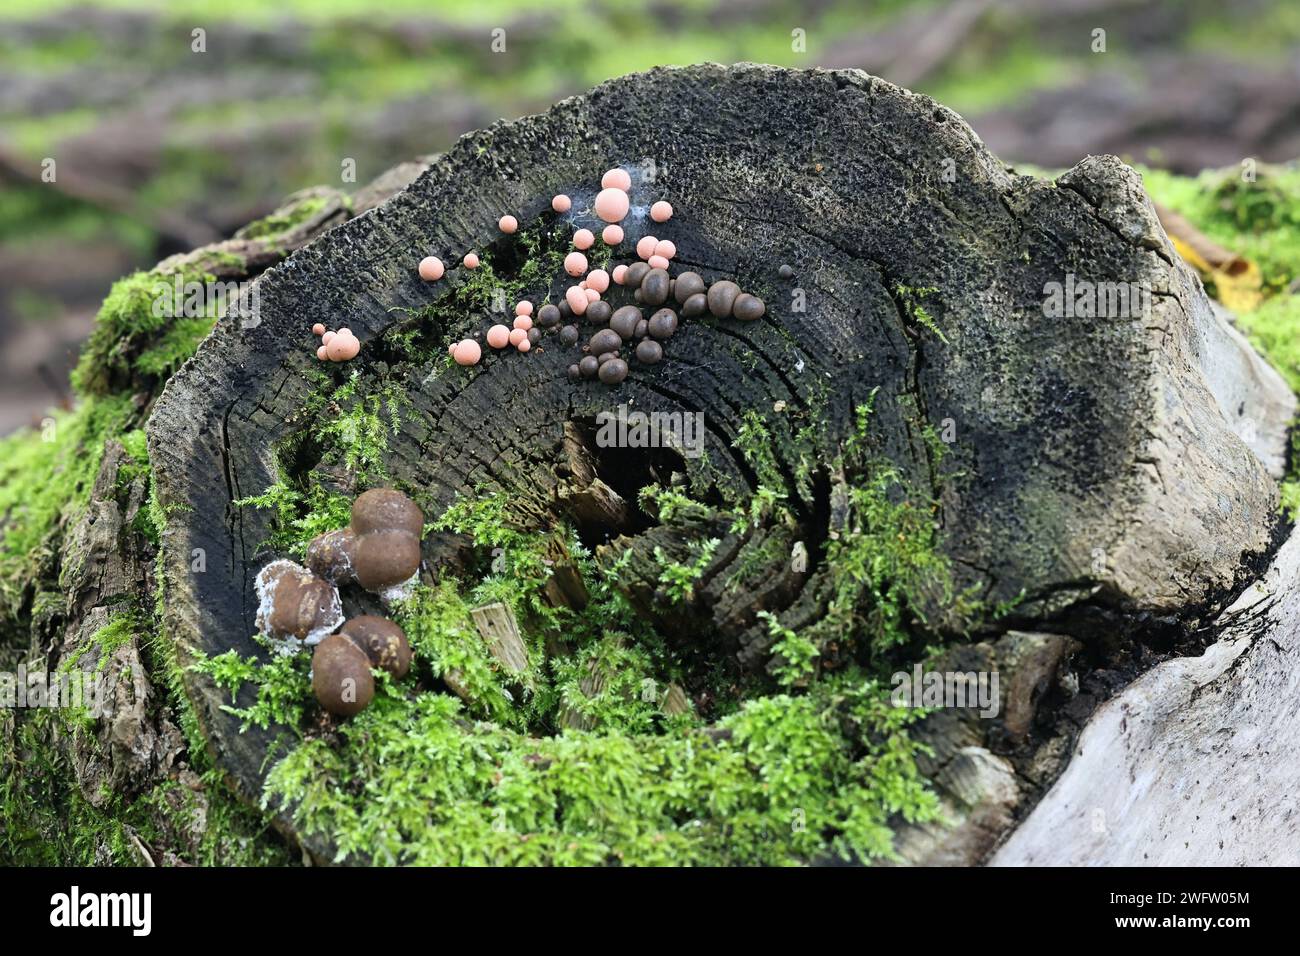 Lycogala epidendrum, commonly known as wolf's milk, and bigger Lycogala flavofuscum, slime molds from Finland Stock Photo